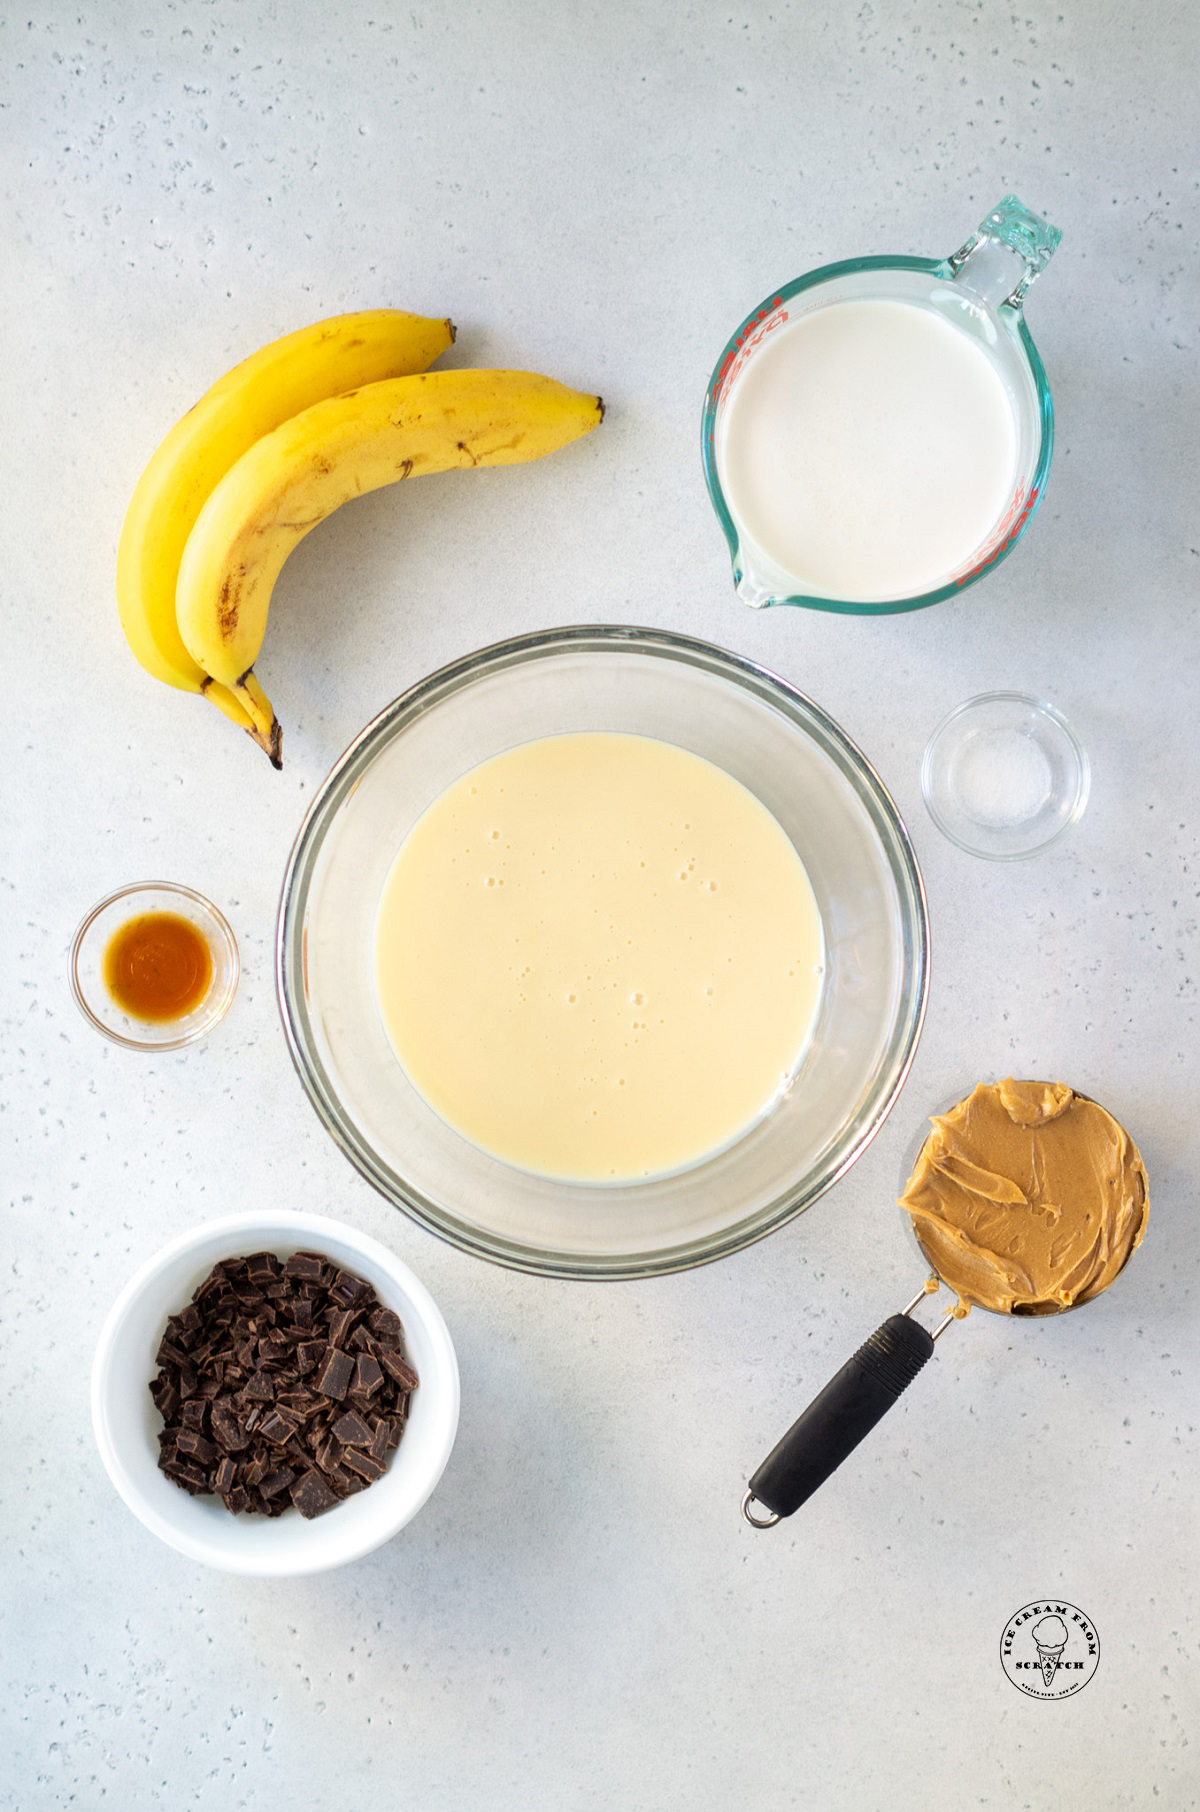 The ingredients needed to make no churn fat elvis ice cream with peanut butter, chocolate, and banana